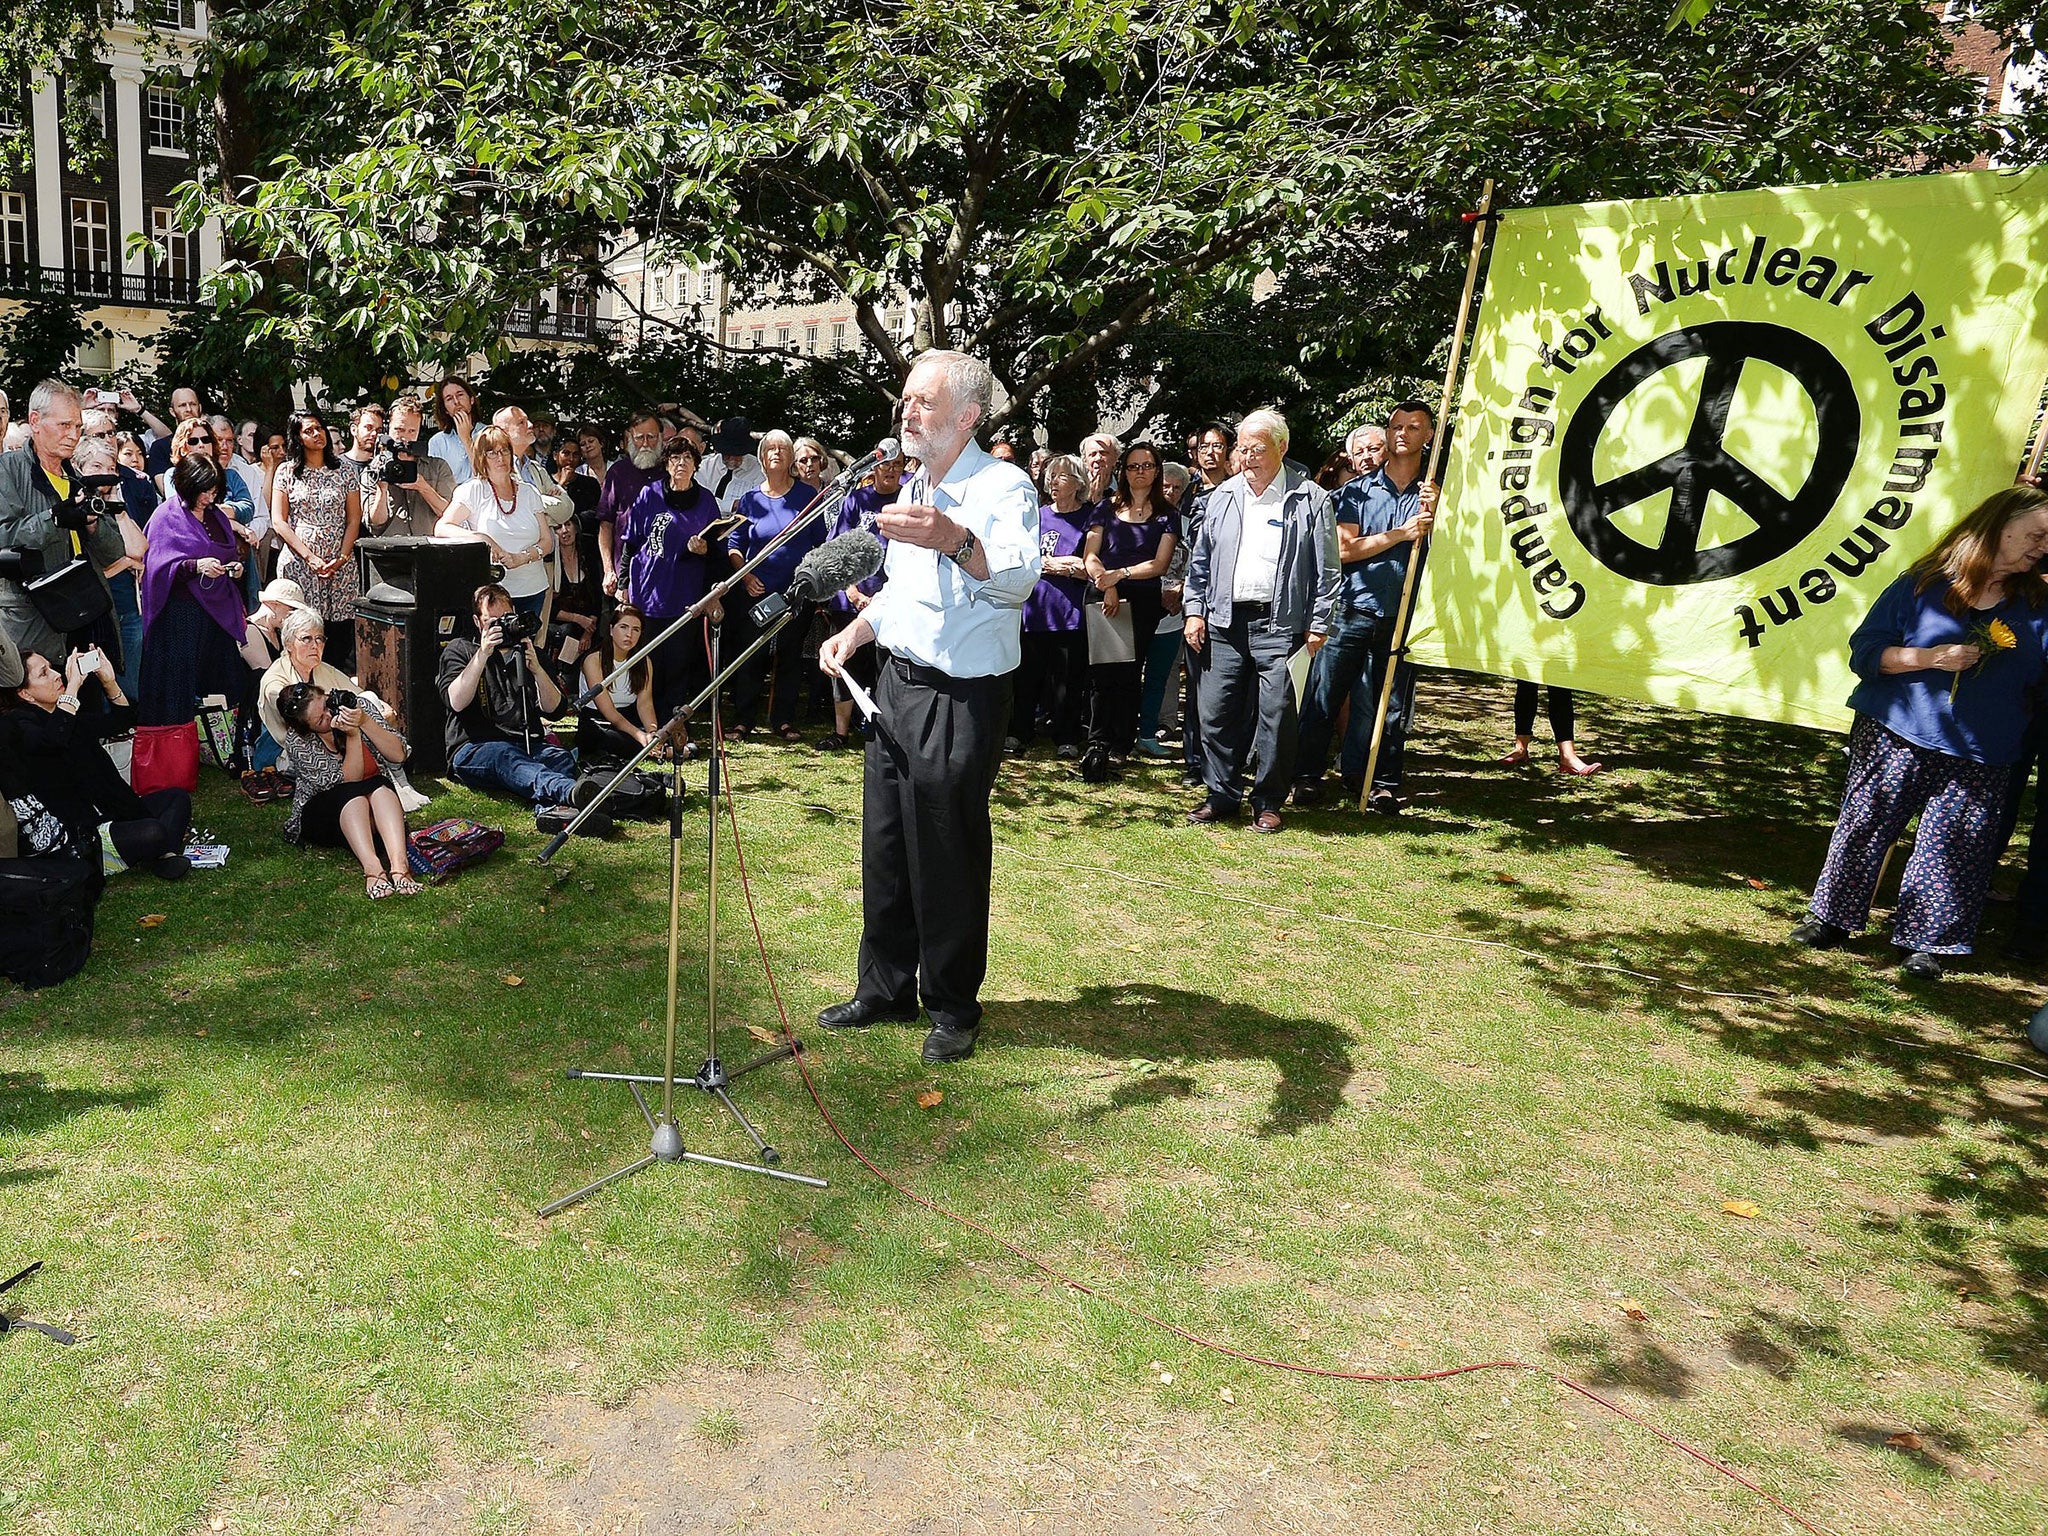 Jeremy Corbyn in London at an event marking the 70th anniversary of the Hiroshima bomb